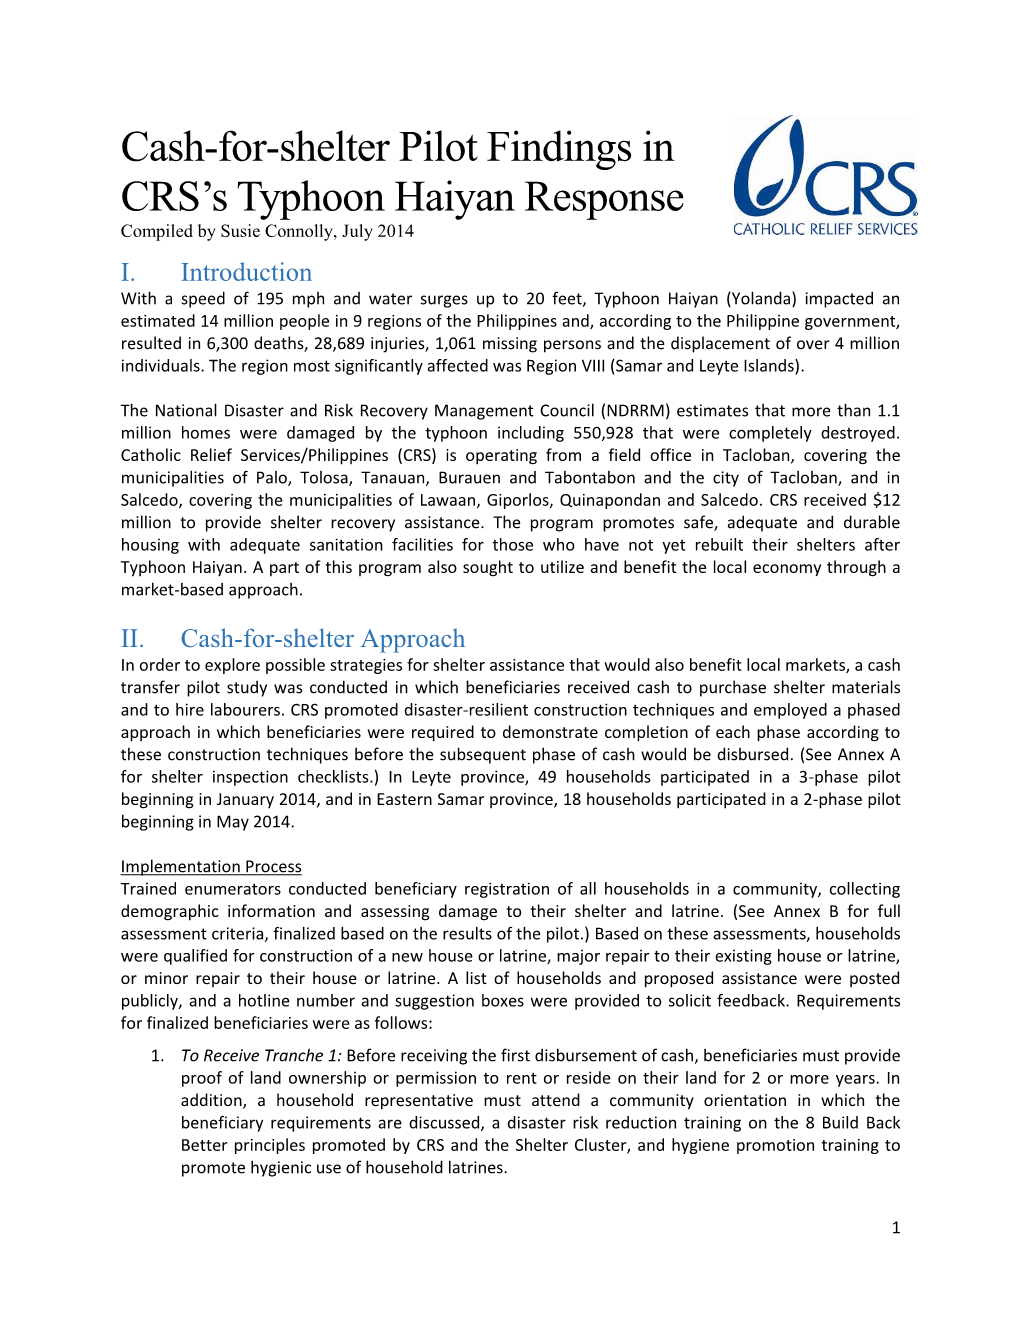 Cash-For-Shelter Pilot Findings in CRS's Typhoon Haiyan Response